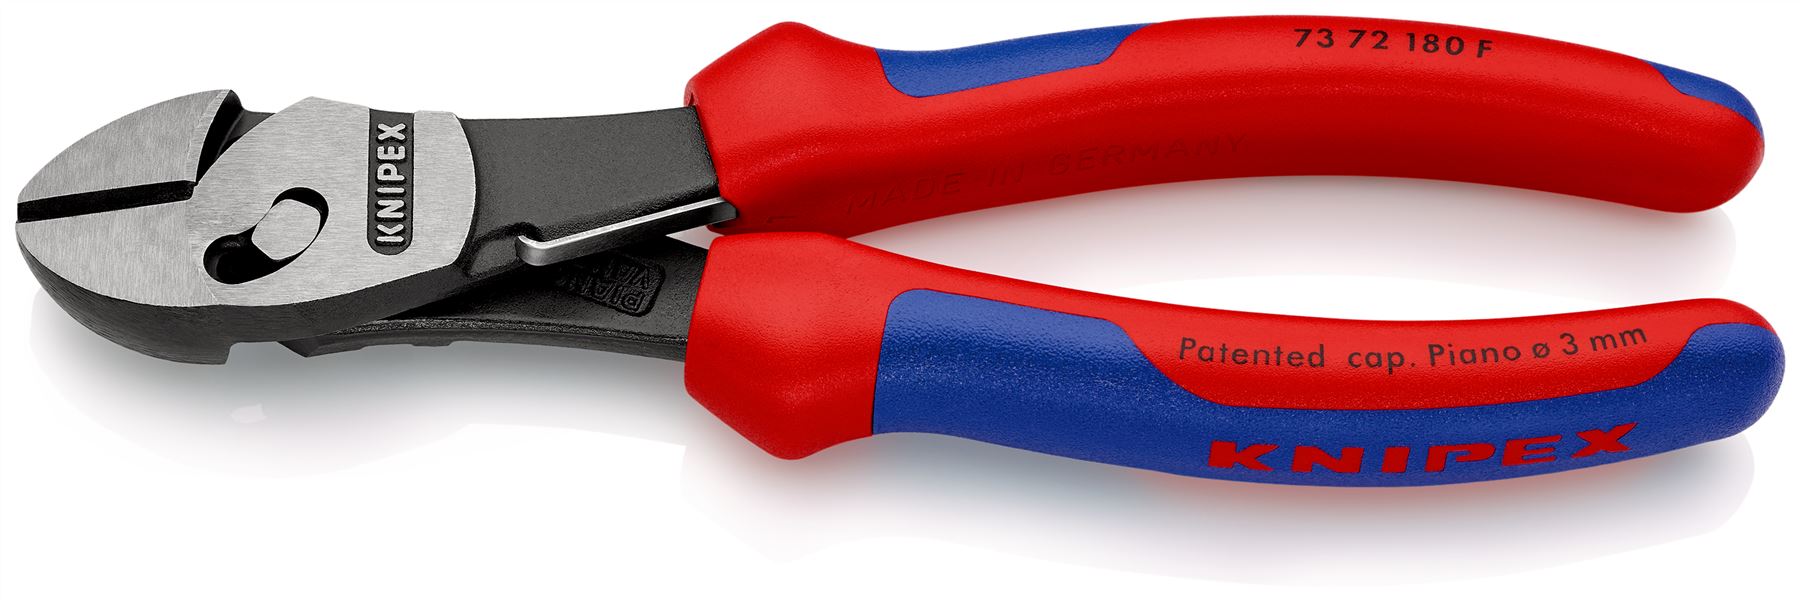 Knipex TwinForce High Performance Diagonal Cutters Cutting Pliers 180mm Opening Spring 73 72 180 F